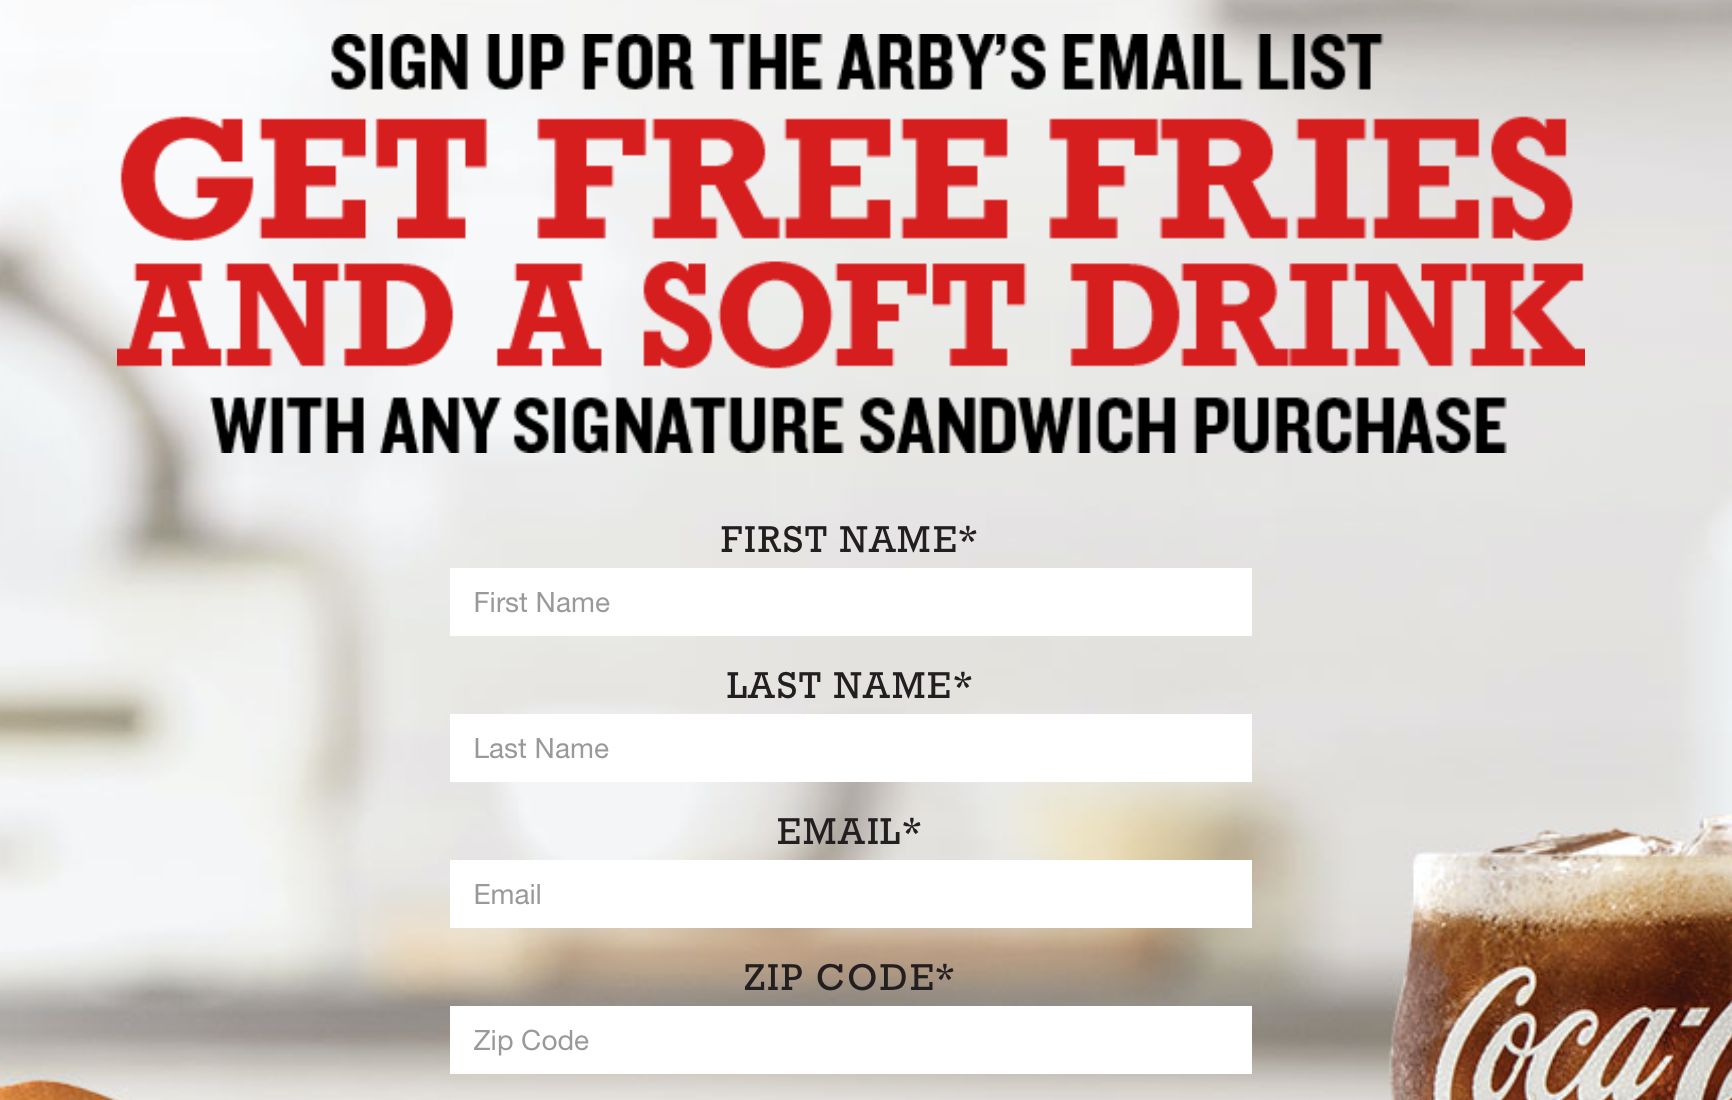 Free Fries and Soft Drink with a Signature Sandwich Purchase when you Join Arby's Email List